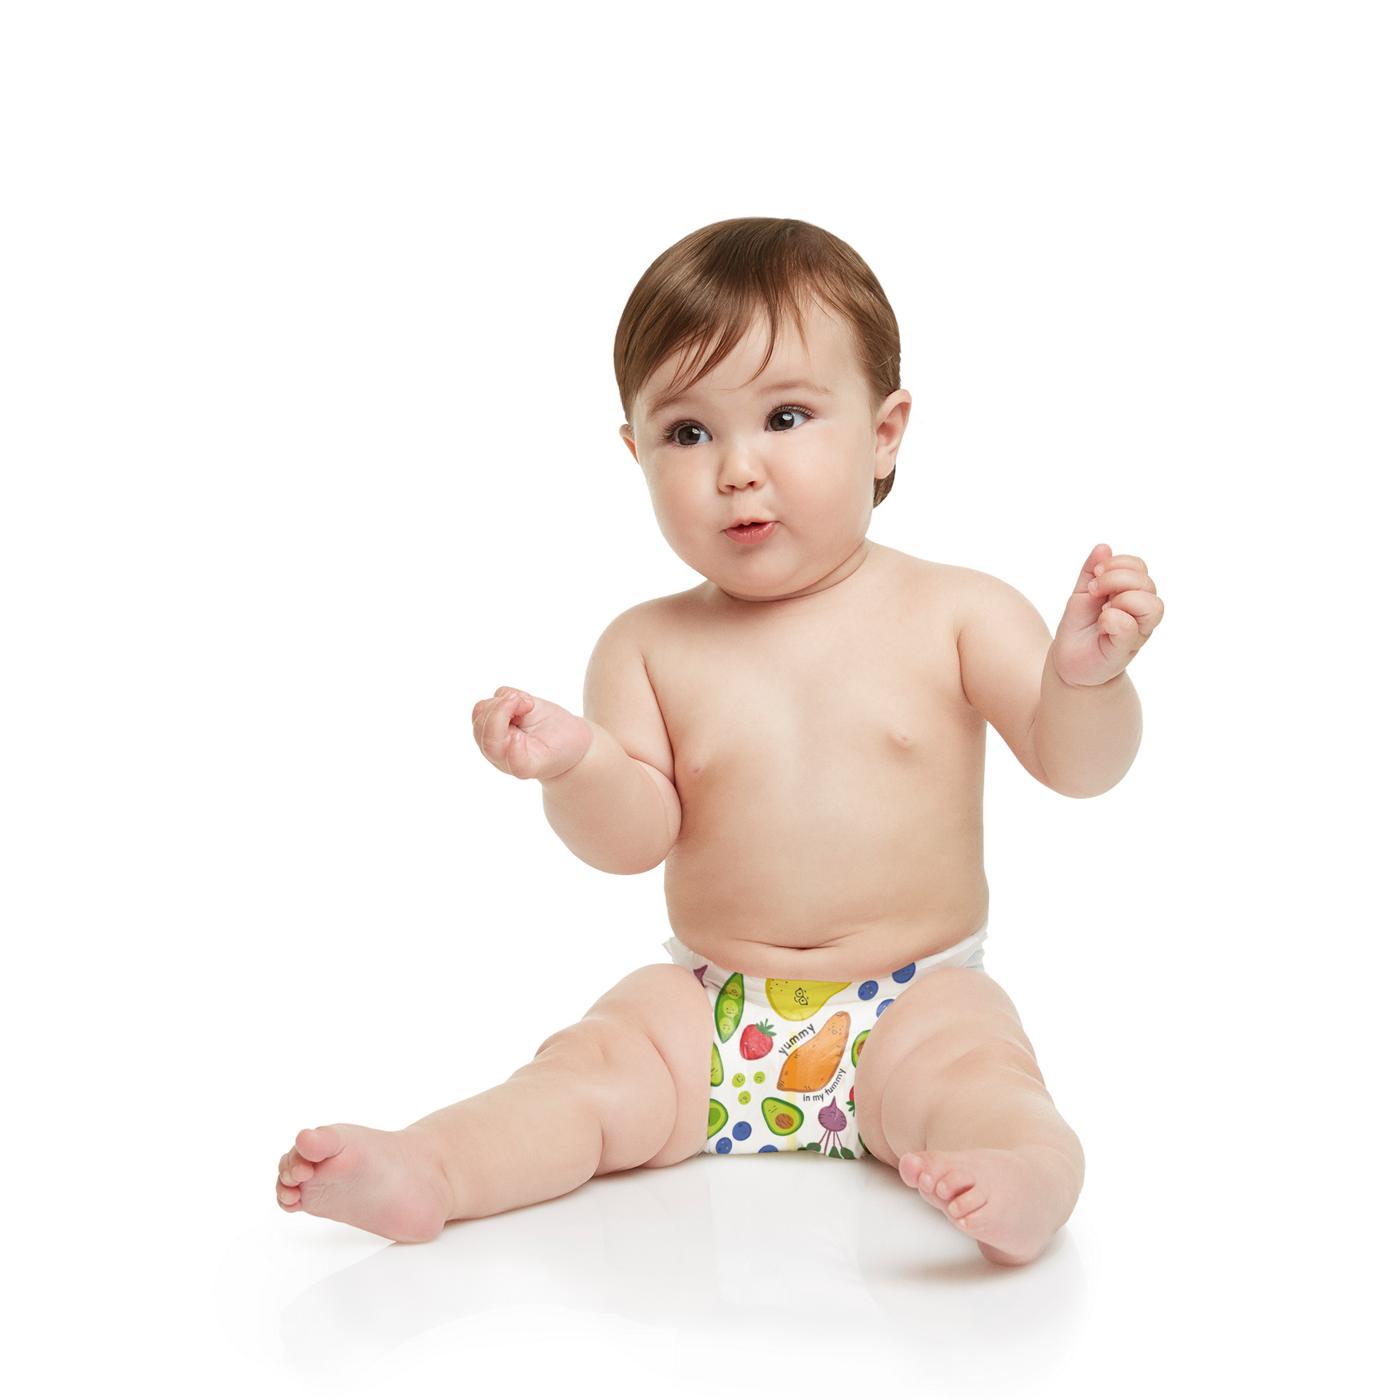 The Honest Company Clean Conscious Diapers - Size 6, Veggie Print; image 6 of 7